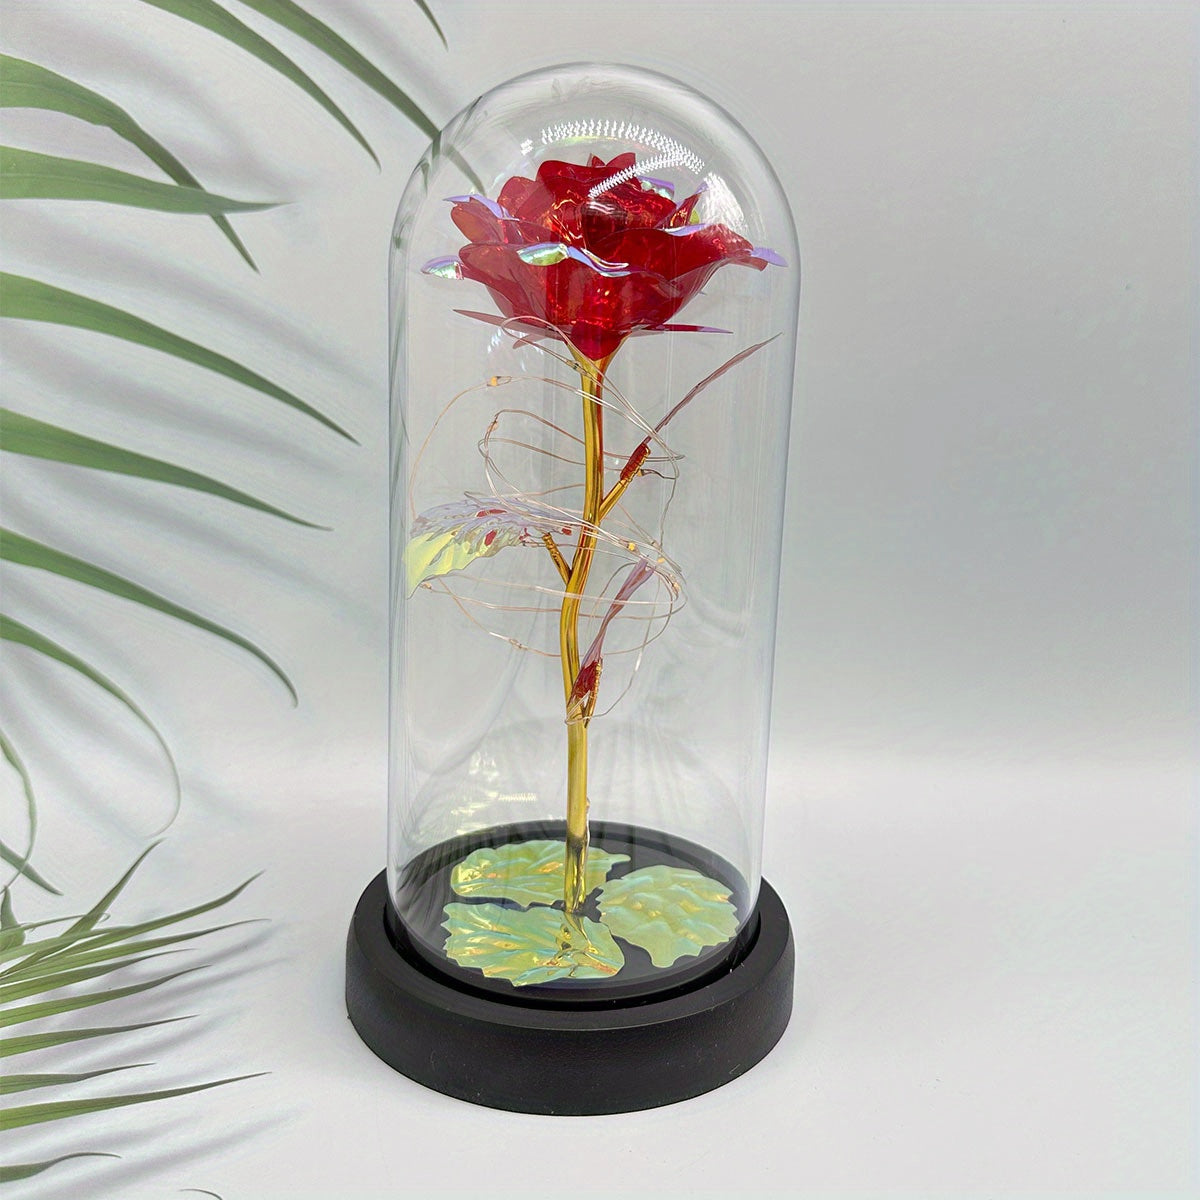 Radiant Rainbow Rose in Glass Dome